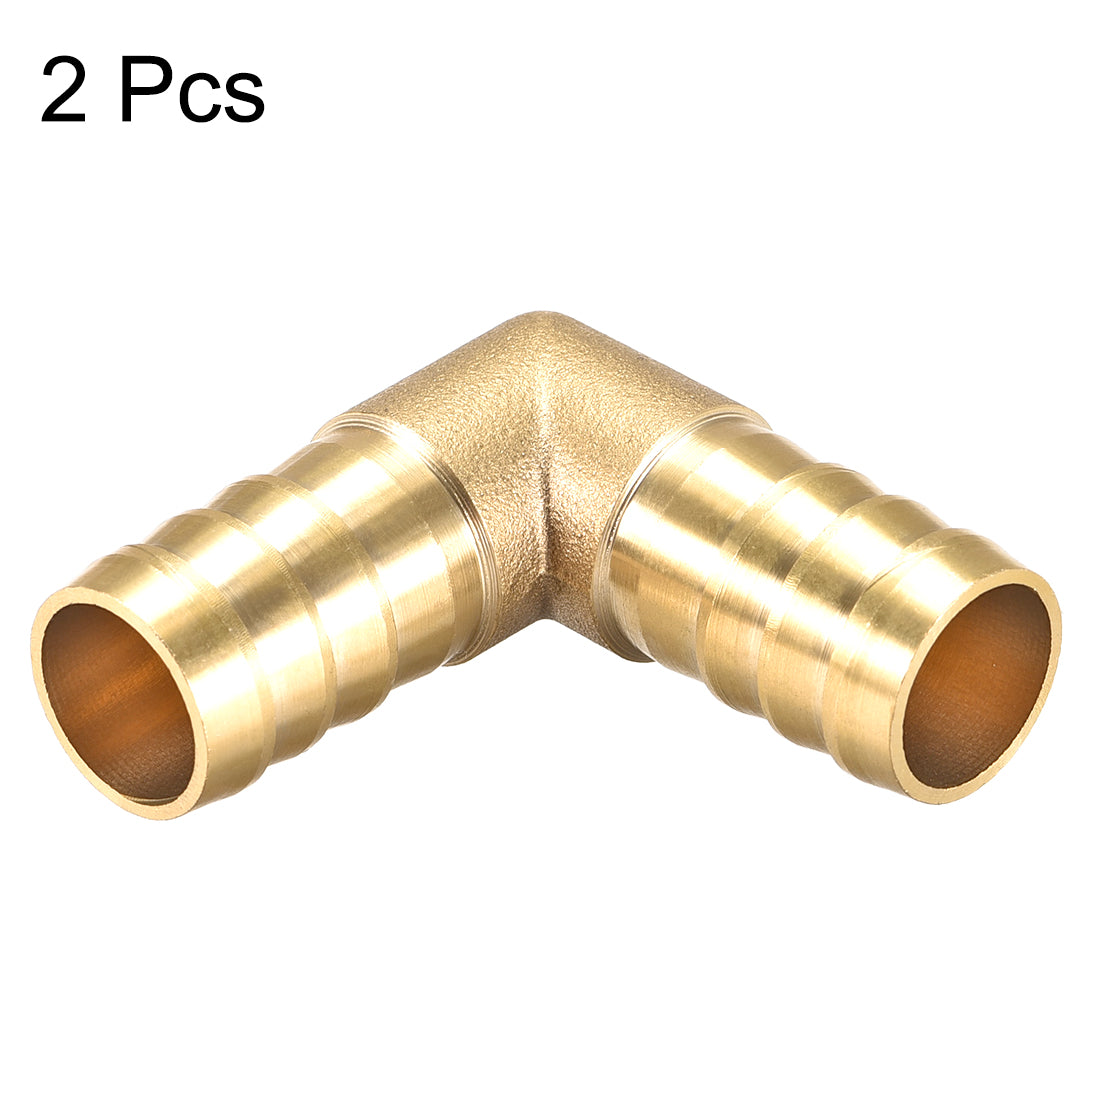 Uxcell Uxcell 19mm Barb Brass Hose Fitting 90 Degree Elbow Pipe Connector Coupler Tubing 2pcs